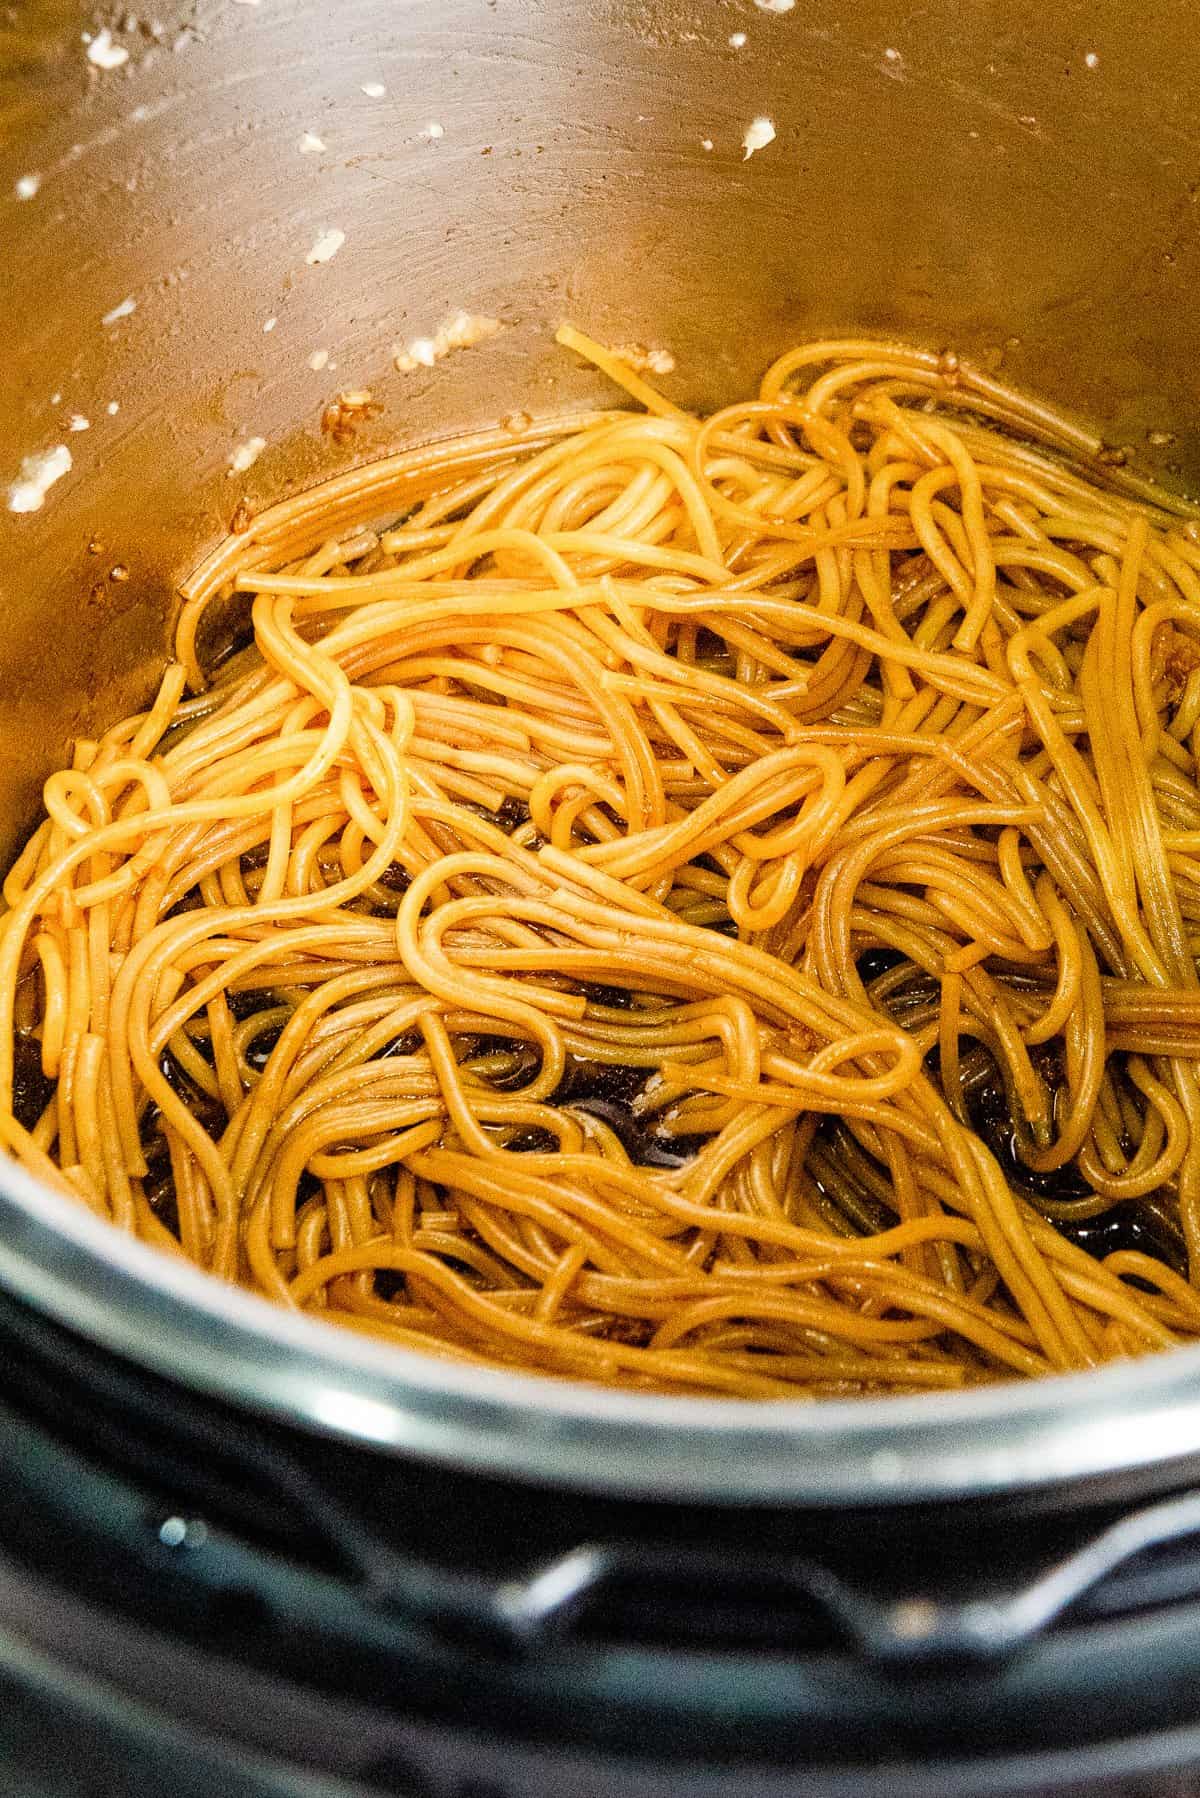 noodles after they have cooked